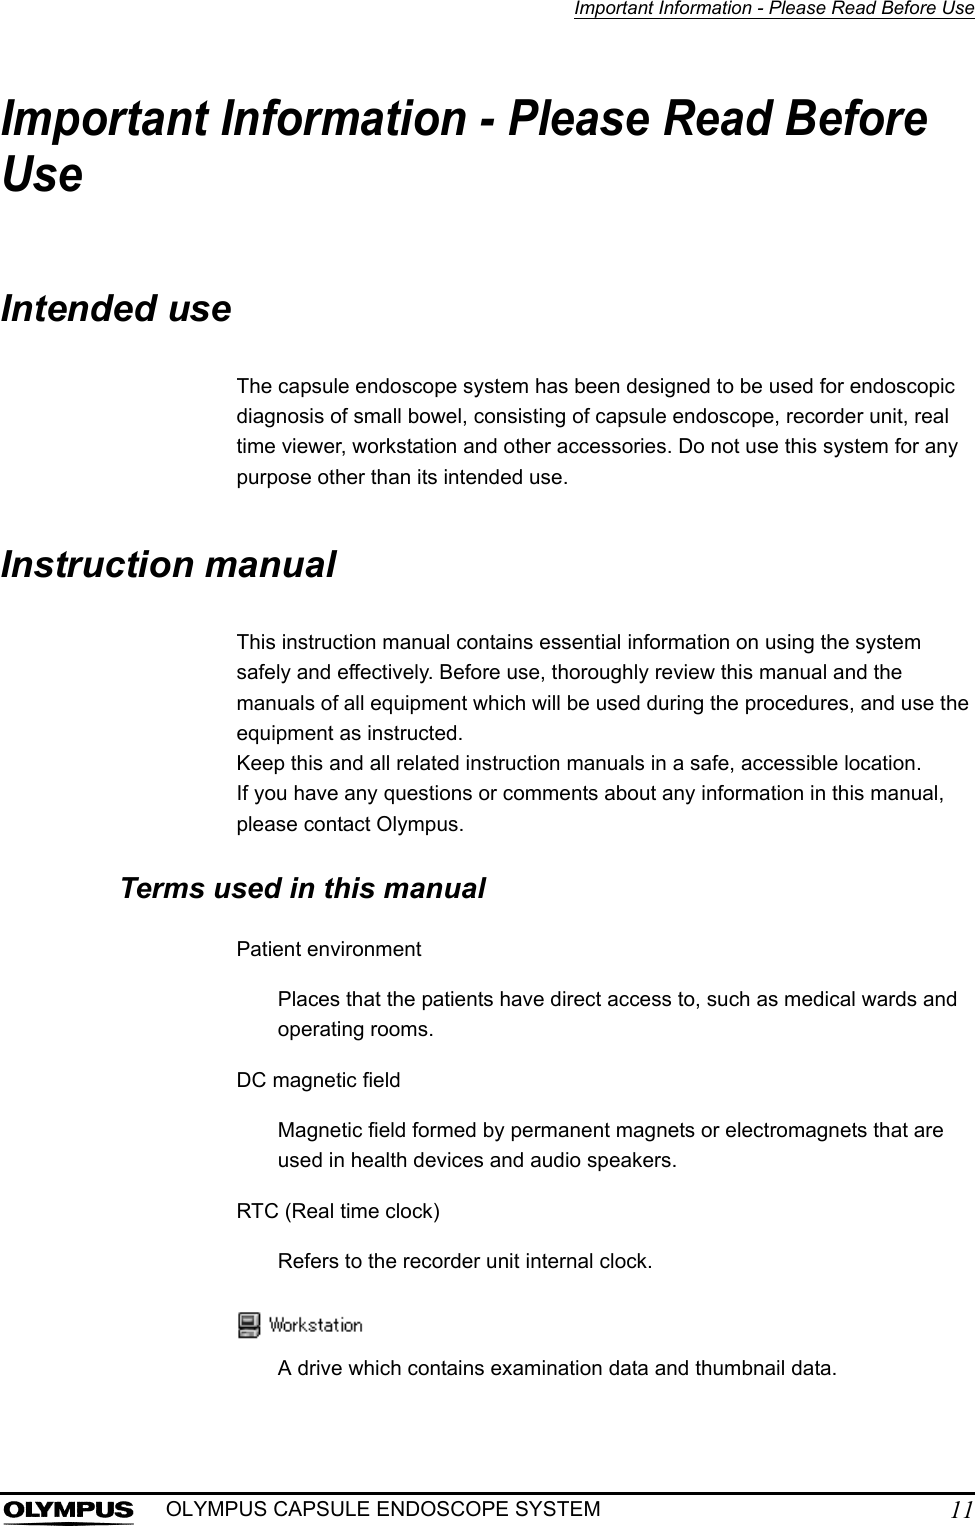 Important Information - Please Read Before Use11OLYMPUS CAPSULE ENDOSCOPE SYSTEMImportant Information - Please Read Before UseIntended useThe capsule endoscope system has been designed to be used for endoscopic diagnosis of small bowel, consisting of capsule endoscope, recorder unit, real time viewer, workstation and other accessories. Do not use this system for any purpose other than its intended use.Instruction manualThis instruction manual contains essential information on using the system safely and effectively. Before use, thoroughly review this manual and the manuals of all equipment which will be used during the procedures, and use the equipment as instructed.Keep this and all related instruction manuals in a safe, accessible location.If you have any questions or comments about any information in this manual, please contact Olympus.Terms used in this manualPatient environmentPlaces that the patients have direct access to, such as medical wards and operating rooms. DC magnetic fieldMagnetic field formed by permanent magnets or electromagnets that are used in health devices and audio speakers.RTC (Real time clock)Refers to the recorder unit internal clock.A drive which contains examination data and thumbnail data.